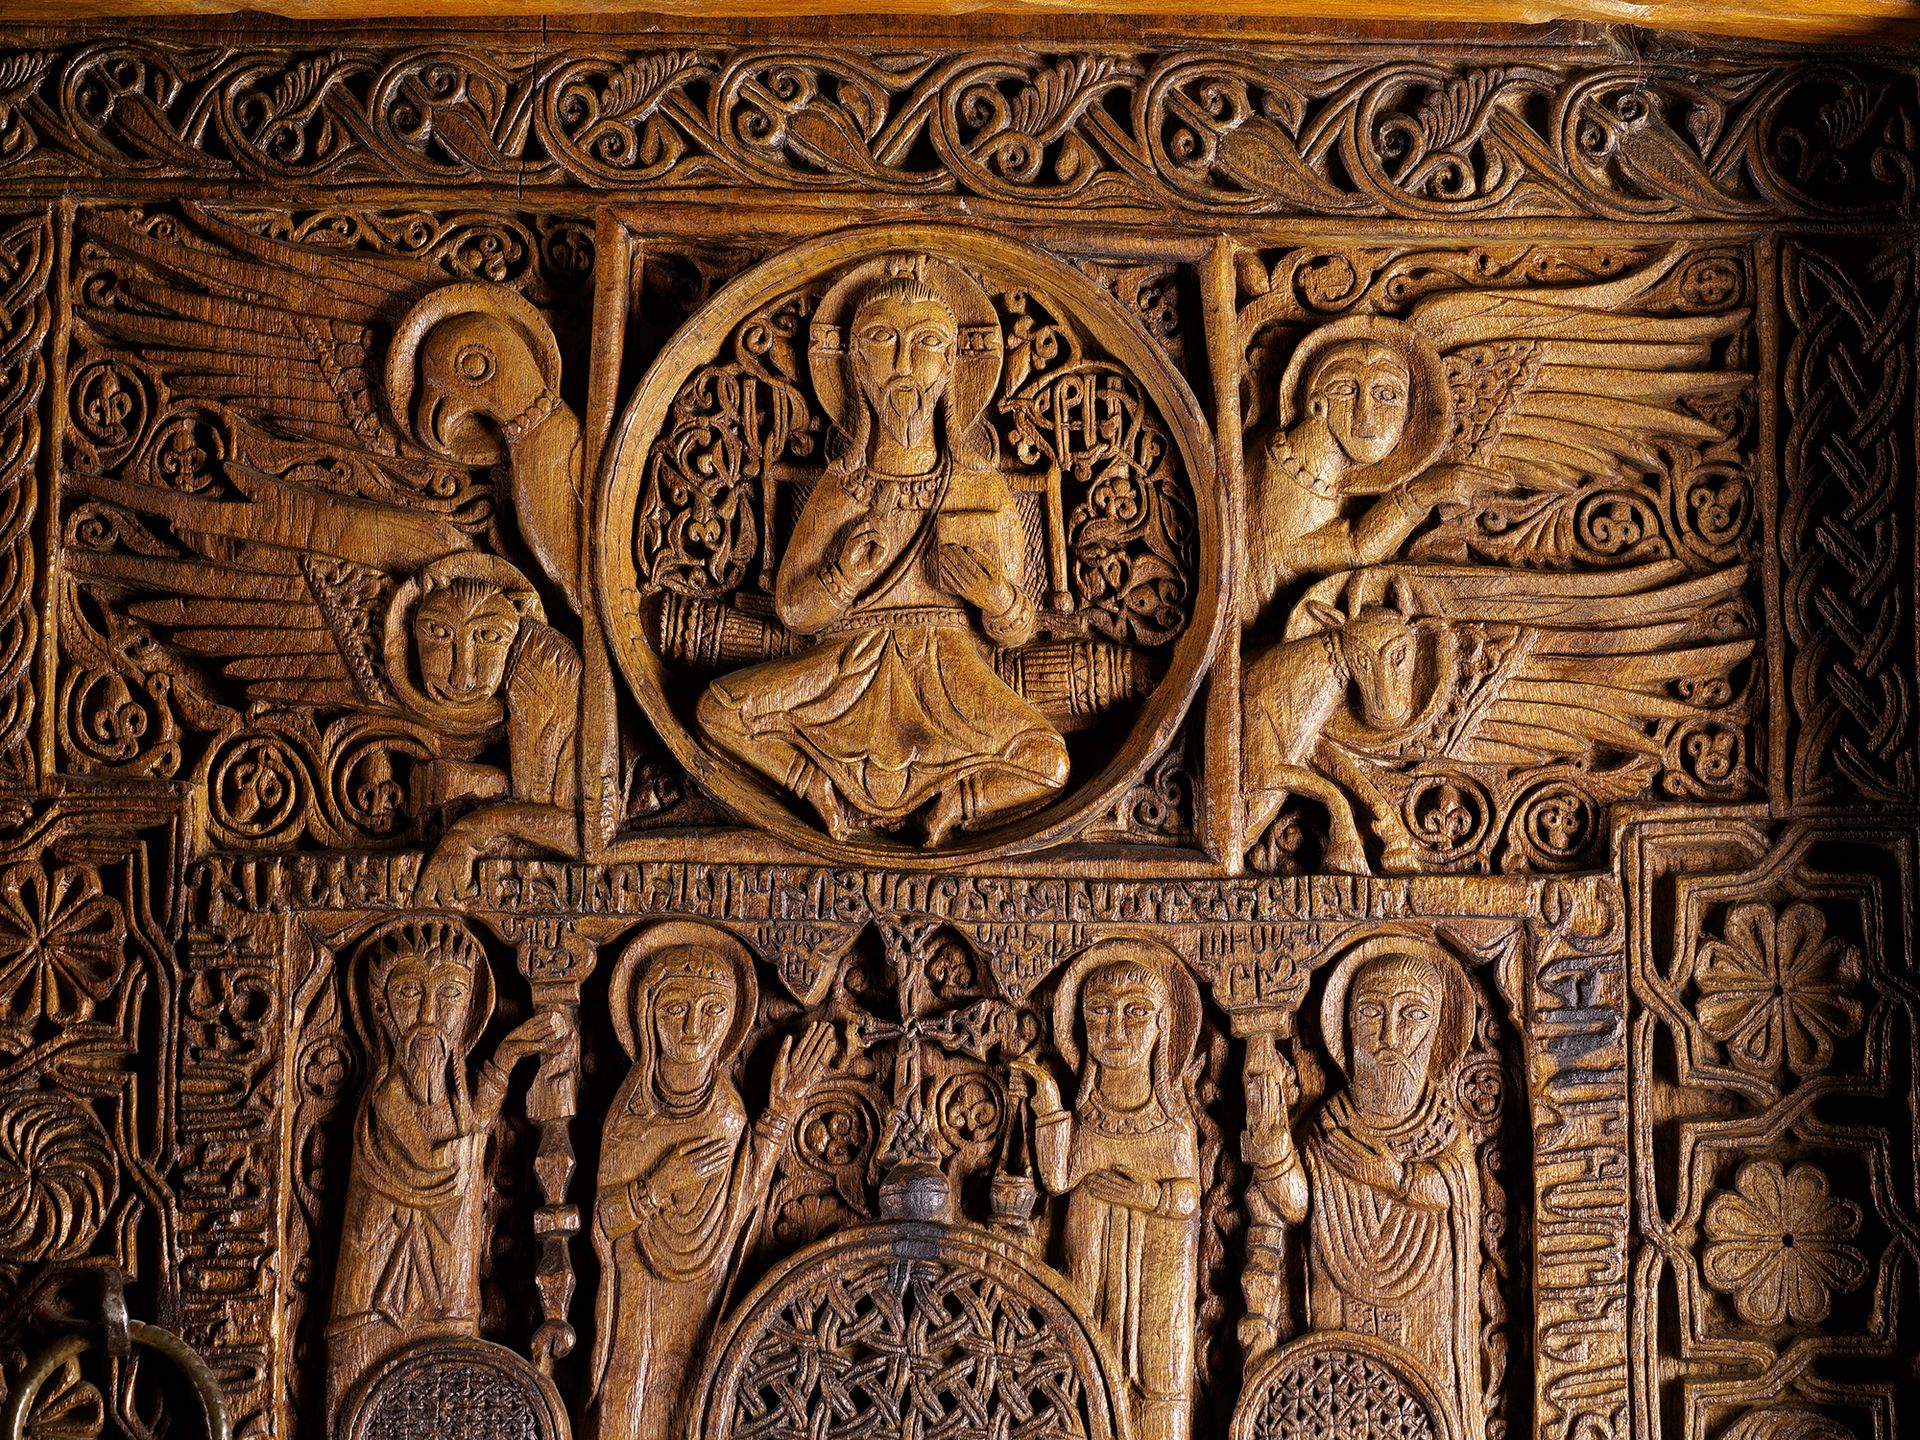 Detail of a carved door (1486) from the Church of the Holy Apostles at the Monastery of Sevan in Armenia Hrair Hawk Khatcherian and Lilit Khachatryan